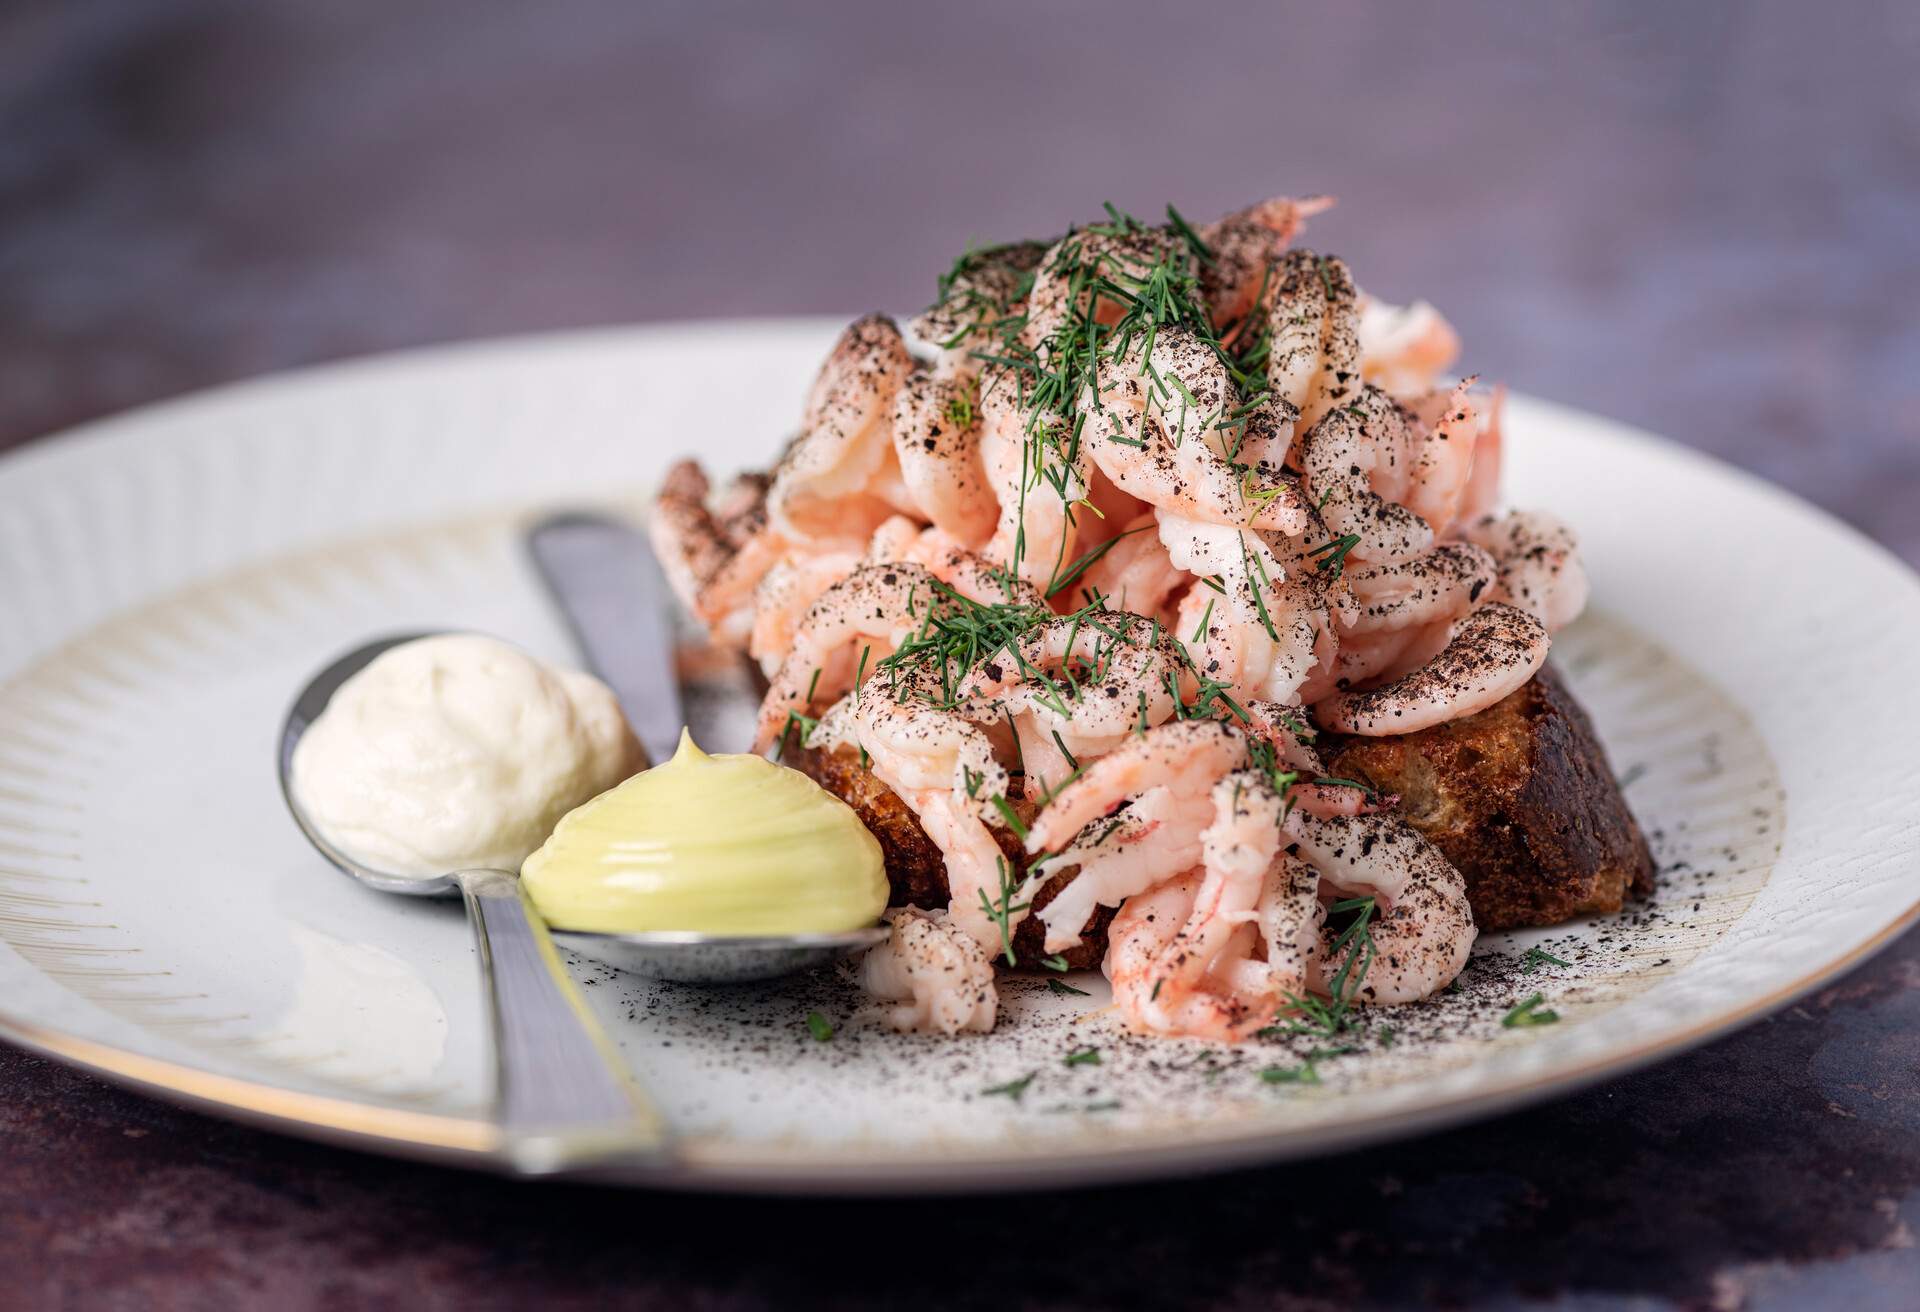 Danish delicacy of shrimps with dill mayonnaise and a danish version of greek yoghurt  or “drained yoghurt. The shrimp is served with lots of fresh dill and chives. Colour, horizontal format with some copy space.